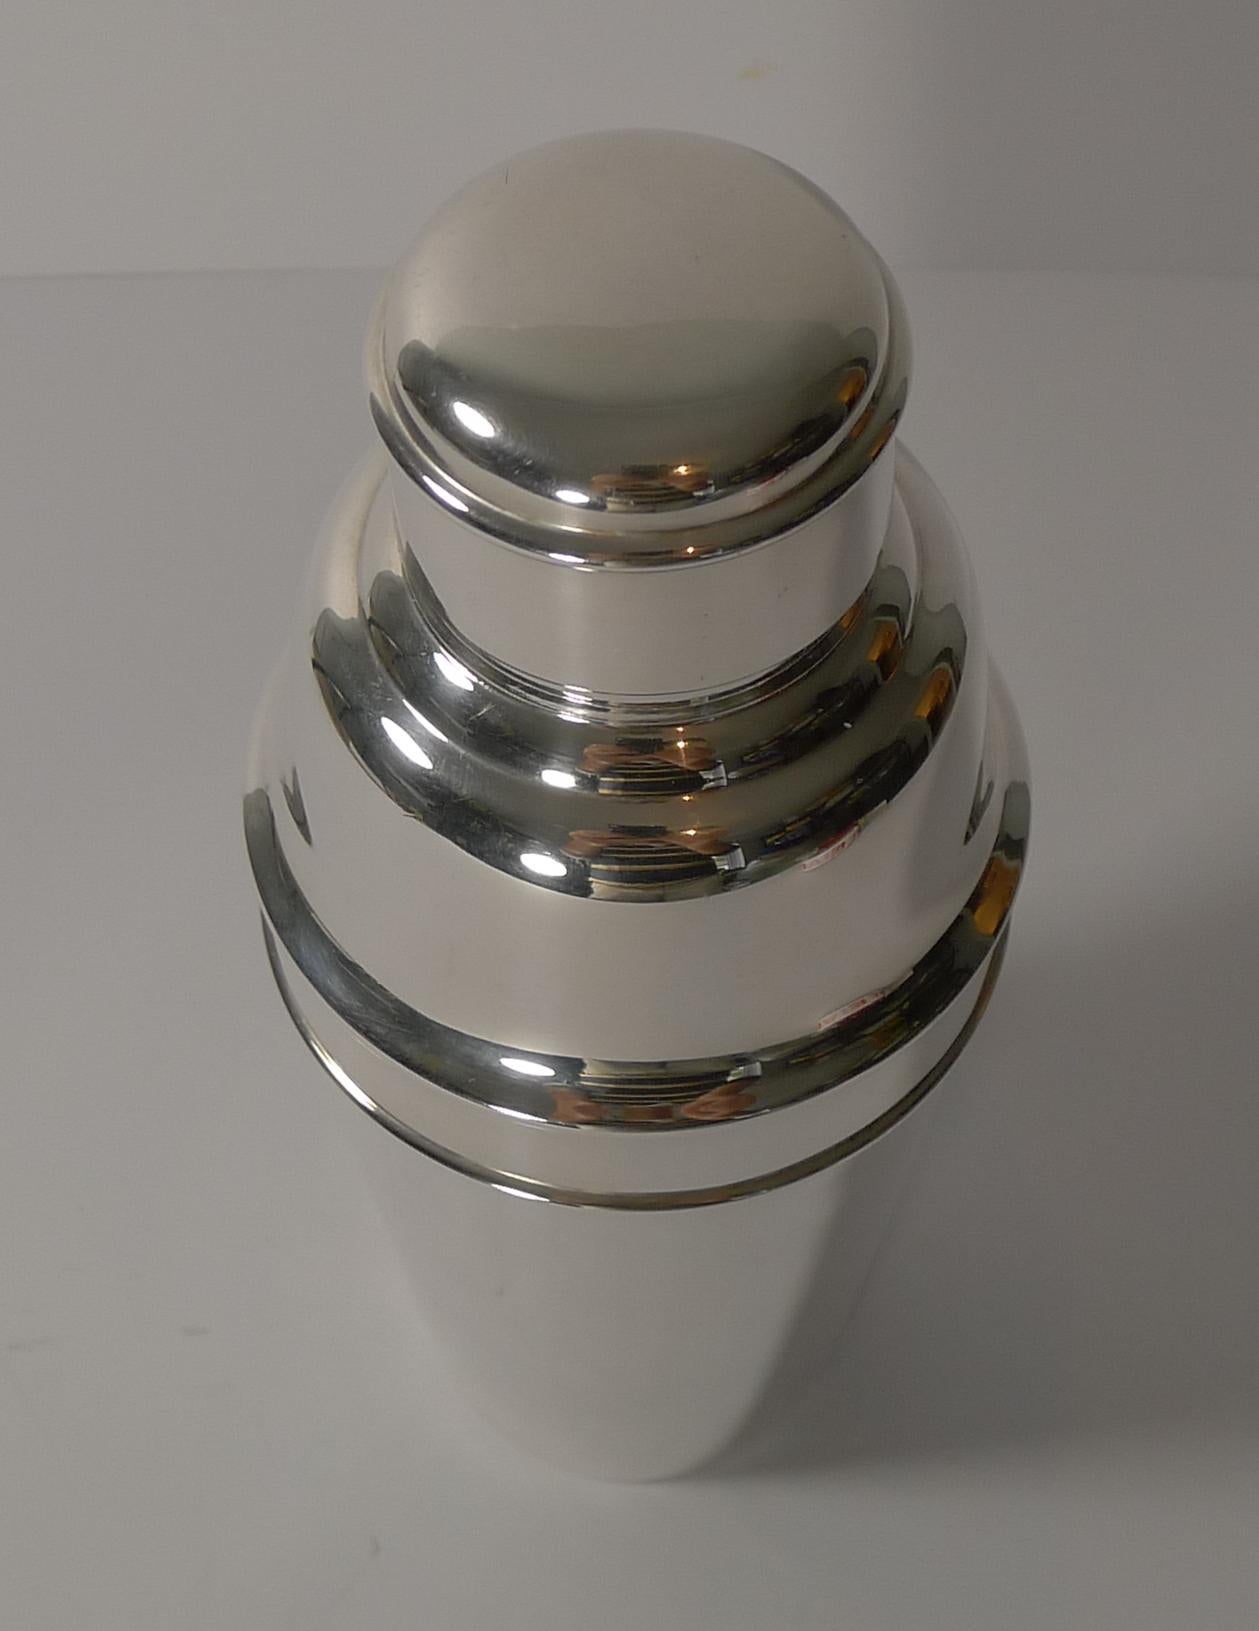 A handsome 1 pint cocktail Shaker in silver plate by the top-notch silversmith, Mappin & Webb of London and Sheffield.

The underside is fully marked together with the trademark 